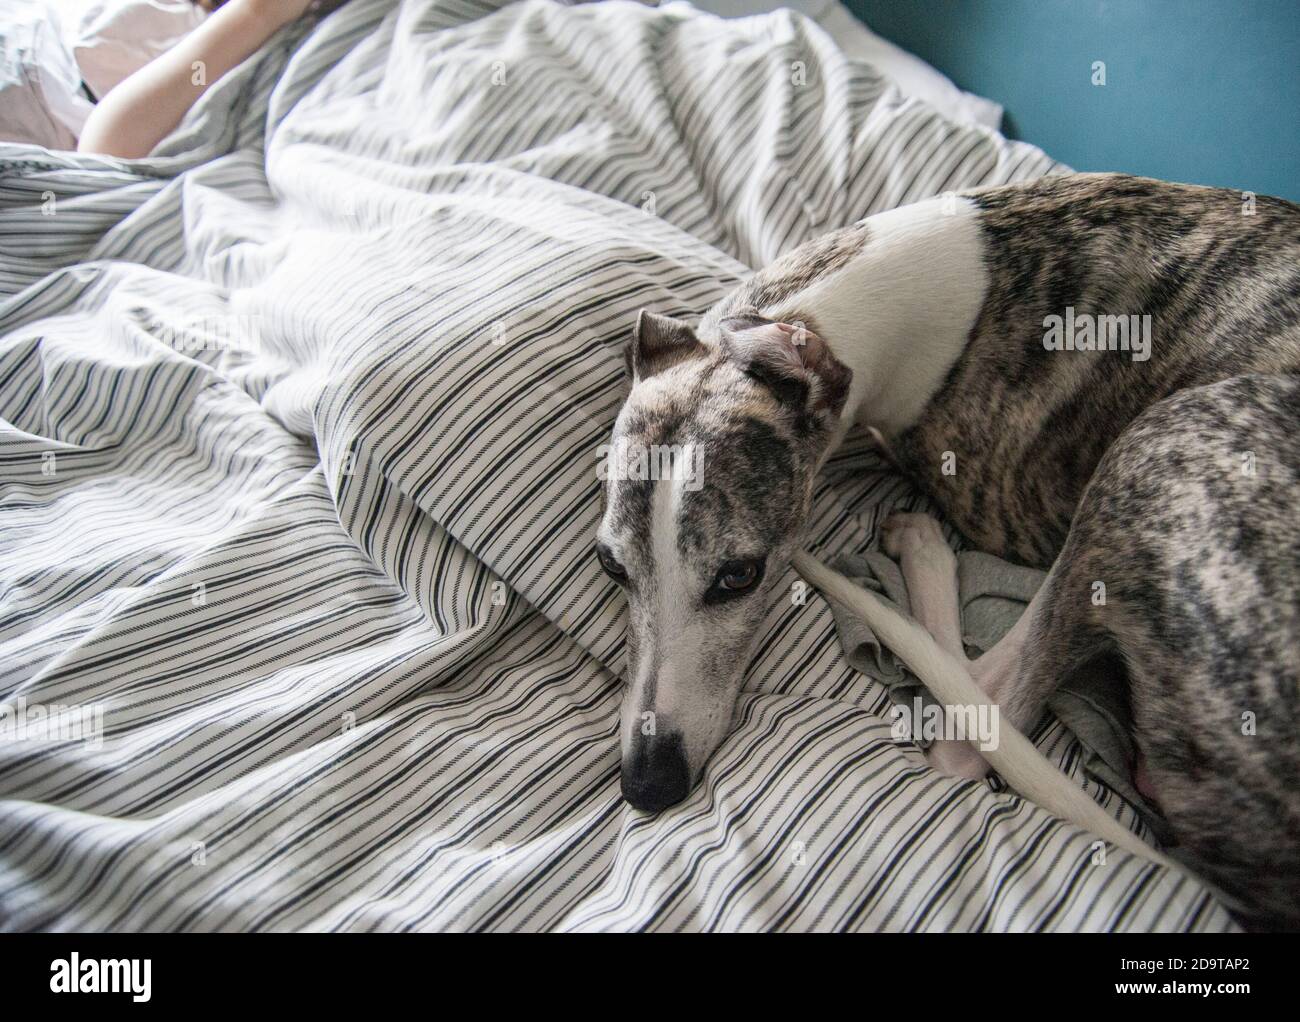 Whippet dog laying on bed Stock Photo